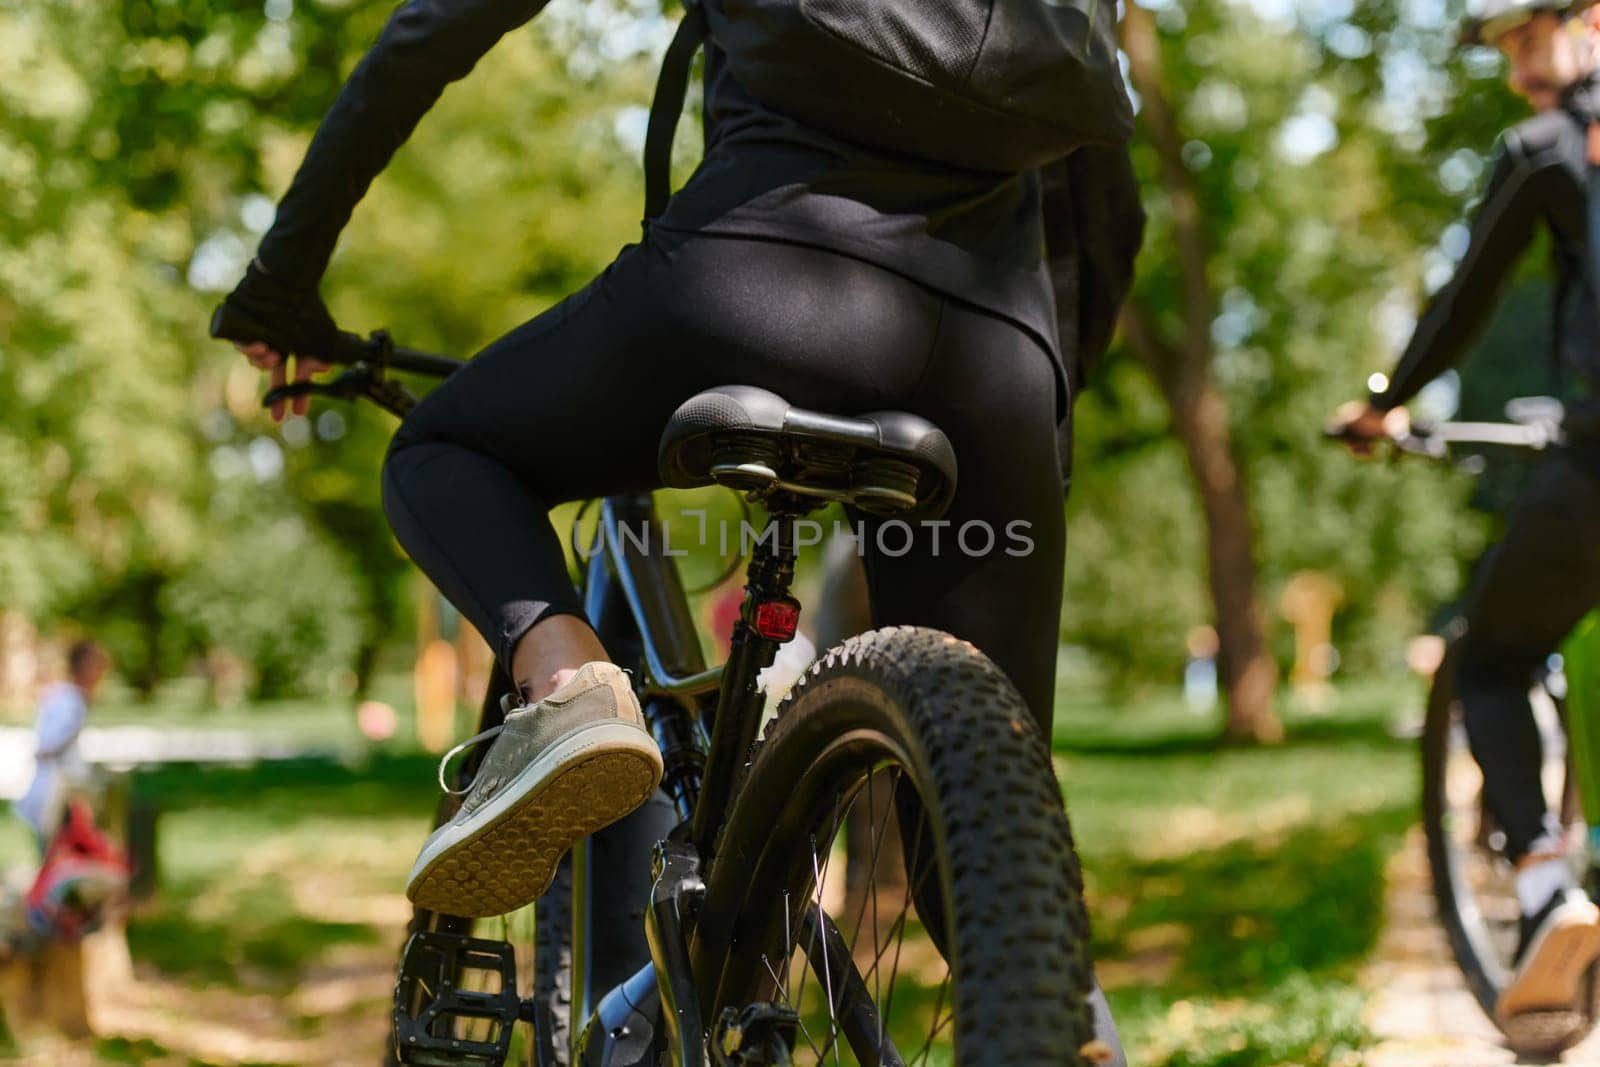 A sports bicycle races through the park, its components in focused motion spinning wheels, agile pedals, and sleek handlebars creating a dynamic spectacle of athleticism and speed against the backdrop of lush greenery by dotshock